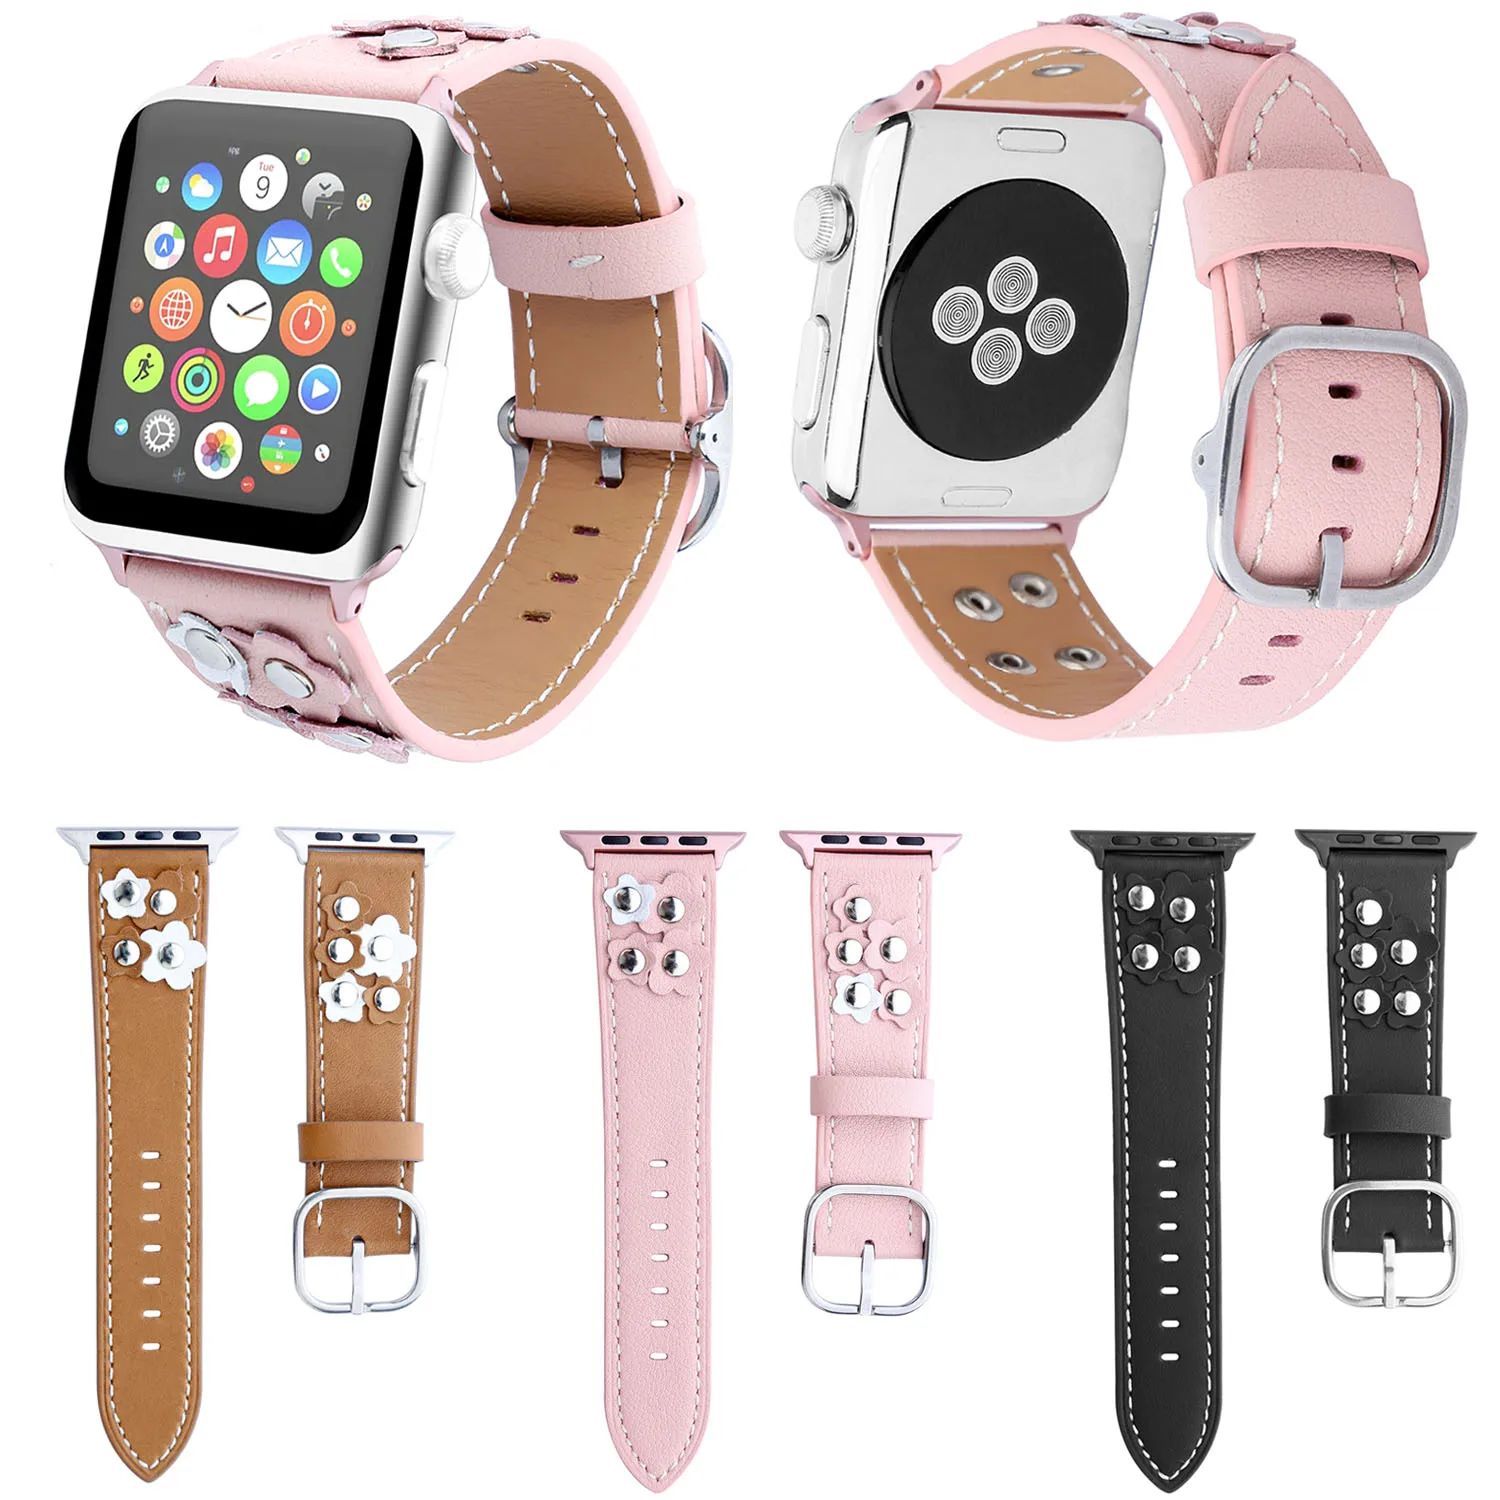 DAHASE Rivet 3D Flower Genuine Leather Strap for Apple Watch Band Series 1 Series 2 Series 3 Watchbands Belt 38mm 42mm